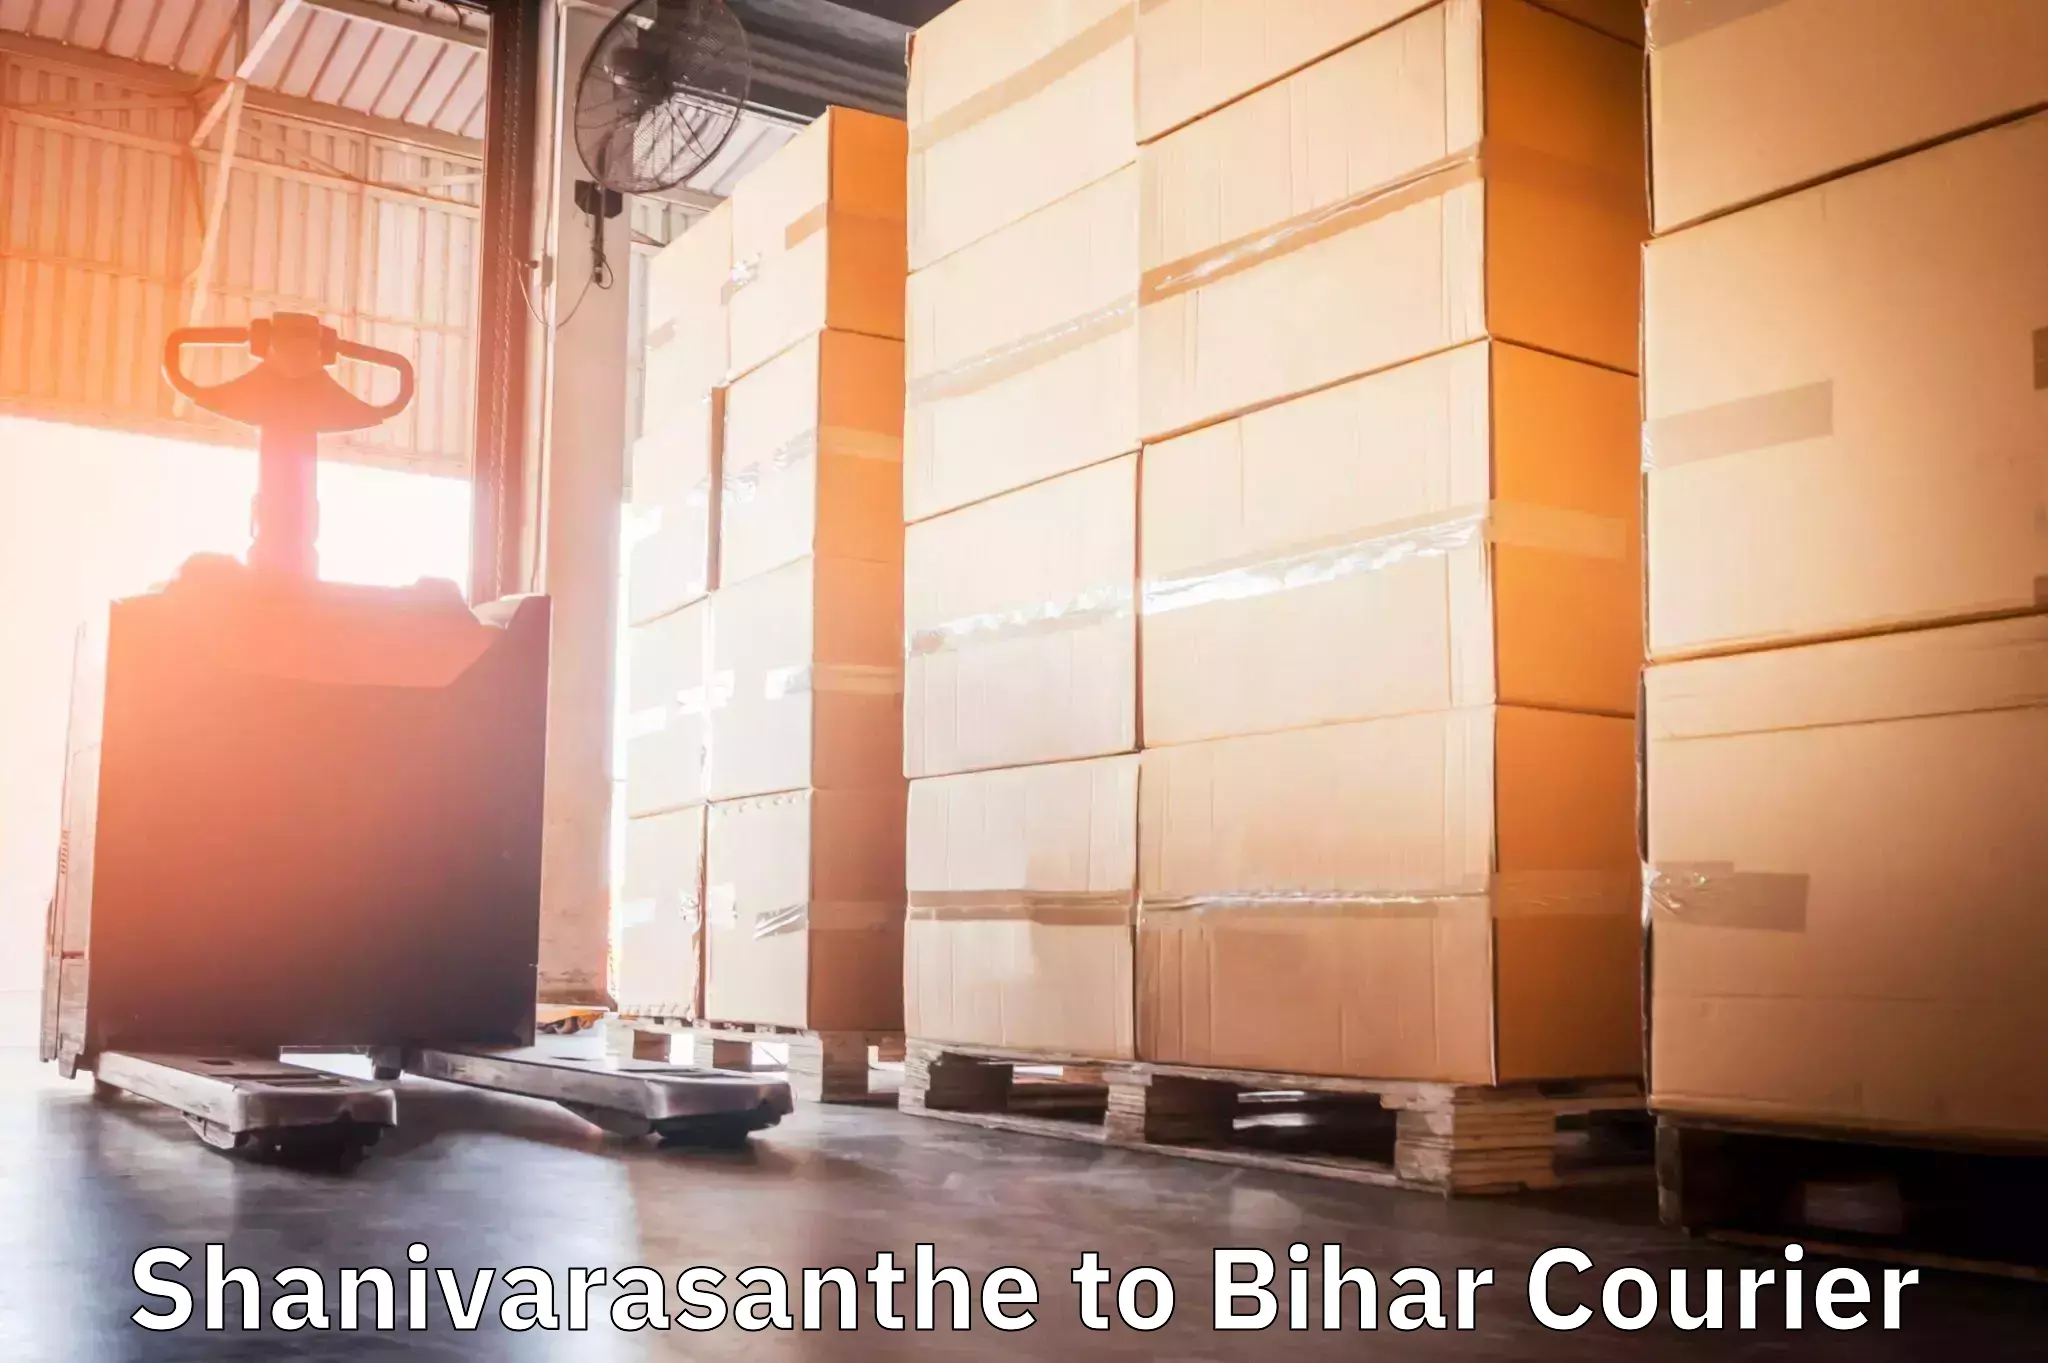 On-call courier service Shanivarasanthe to Biraul